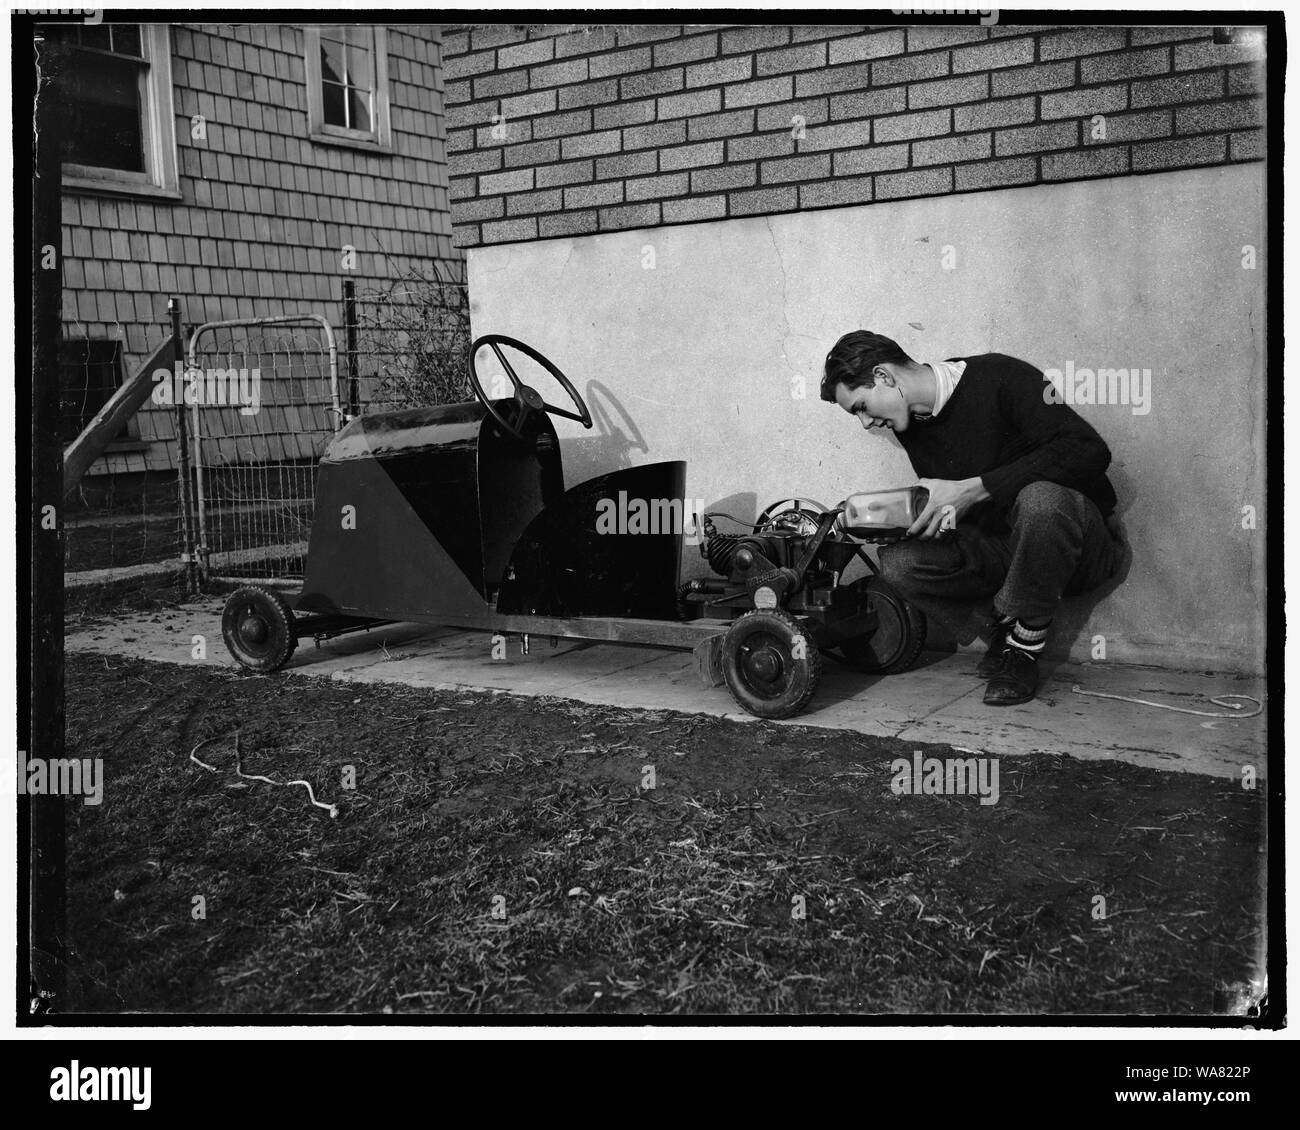 Builds own Jalopy. Washington, D.C., Feb. 2. Thirty dollars was all it cost Robert Preston, 16-year-old high school senior, to build this midget automobile. Weighing approximately 250 pounds, the 'jalopy' is powered with a washing machine motor of 3-4 horsepower and has a maximum speed of 20 miles an hour. His license tags for this year will cost 32 cents, 2-2-39 Stock Photo